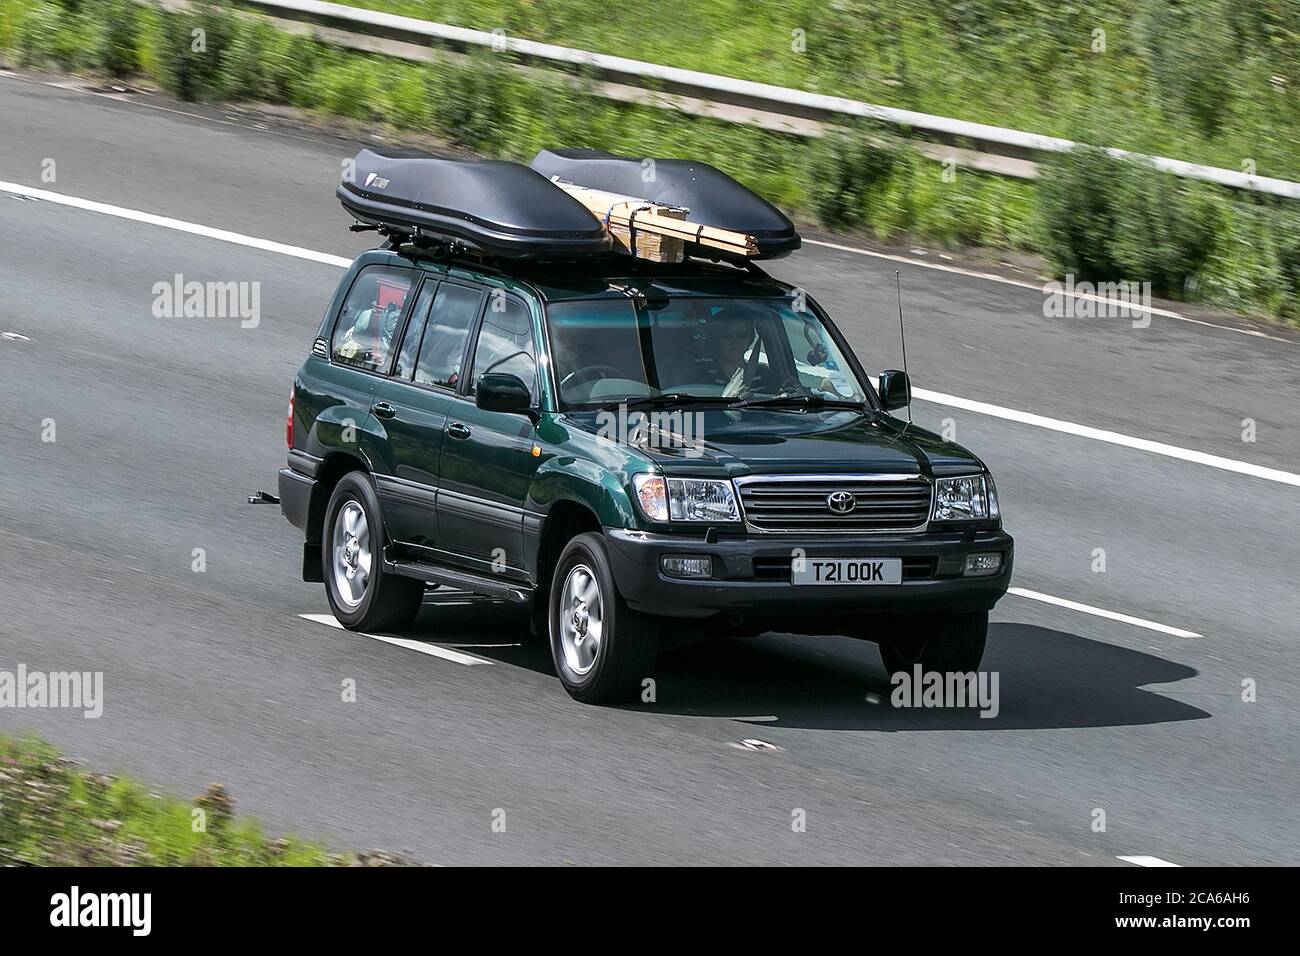 Page 2 - Car Toyota High Resolution Stock Photography and Images - Alamy